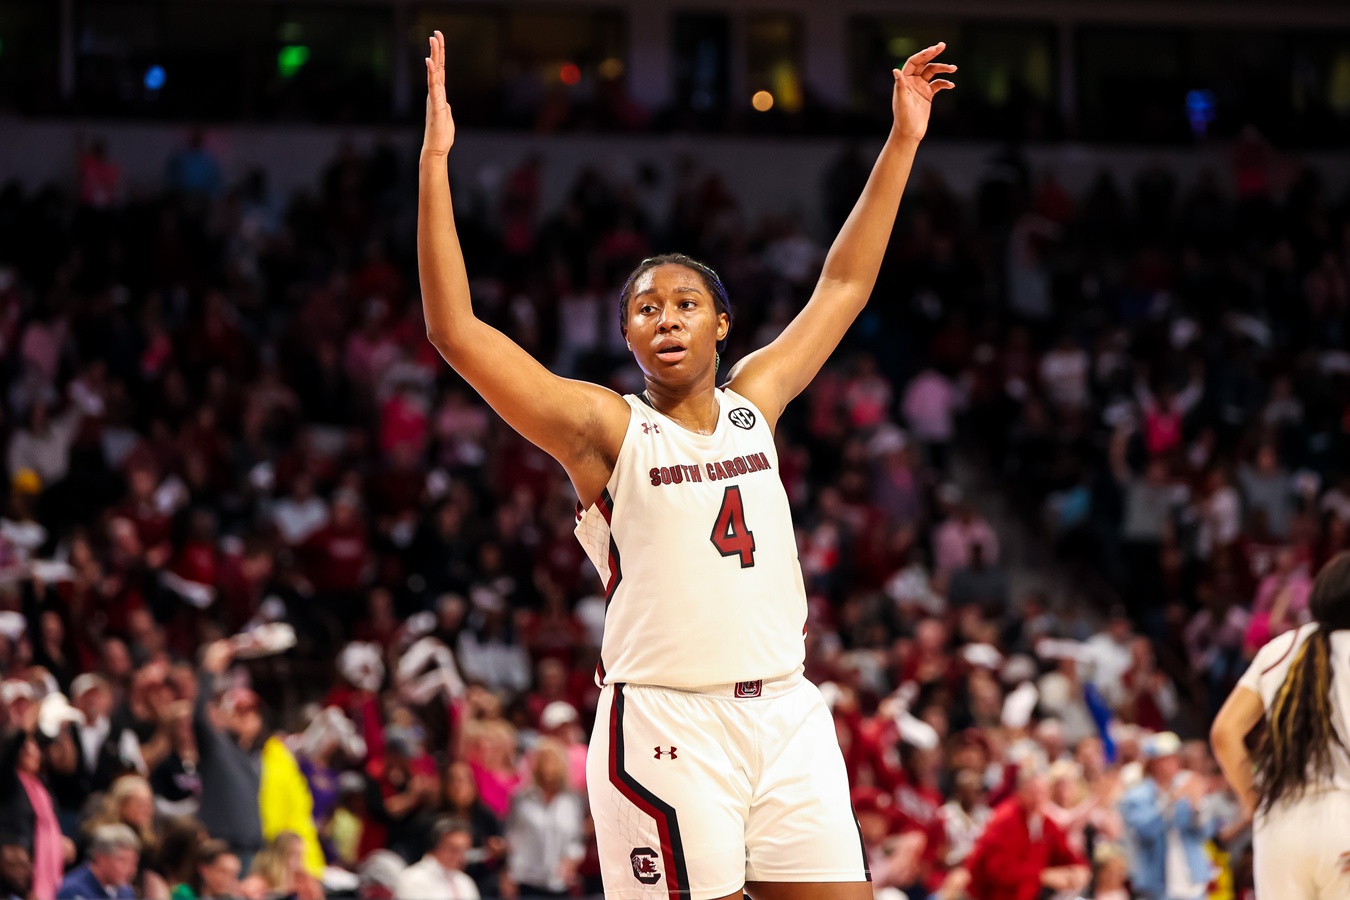 Aliyah Boston leads the charge for a wild college basketball weekend.